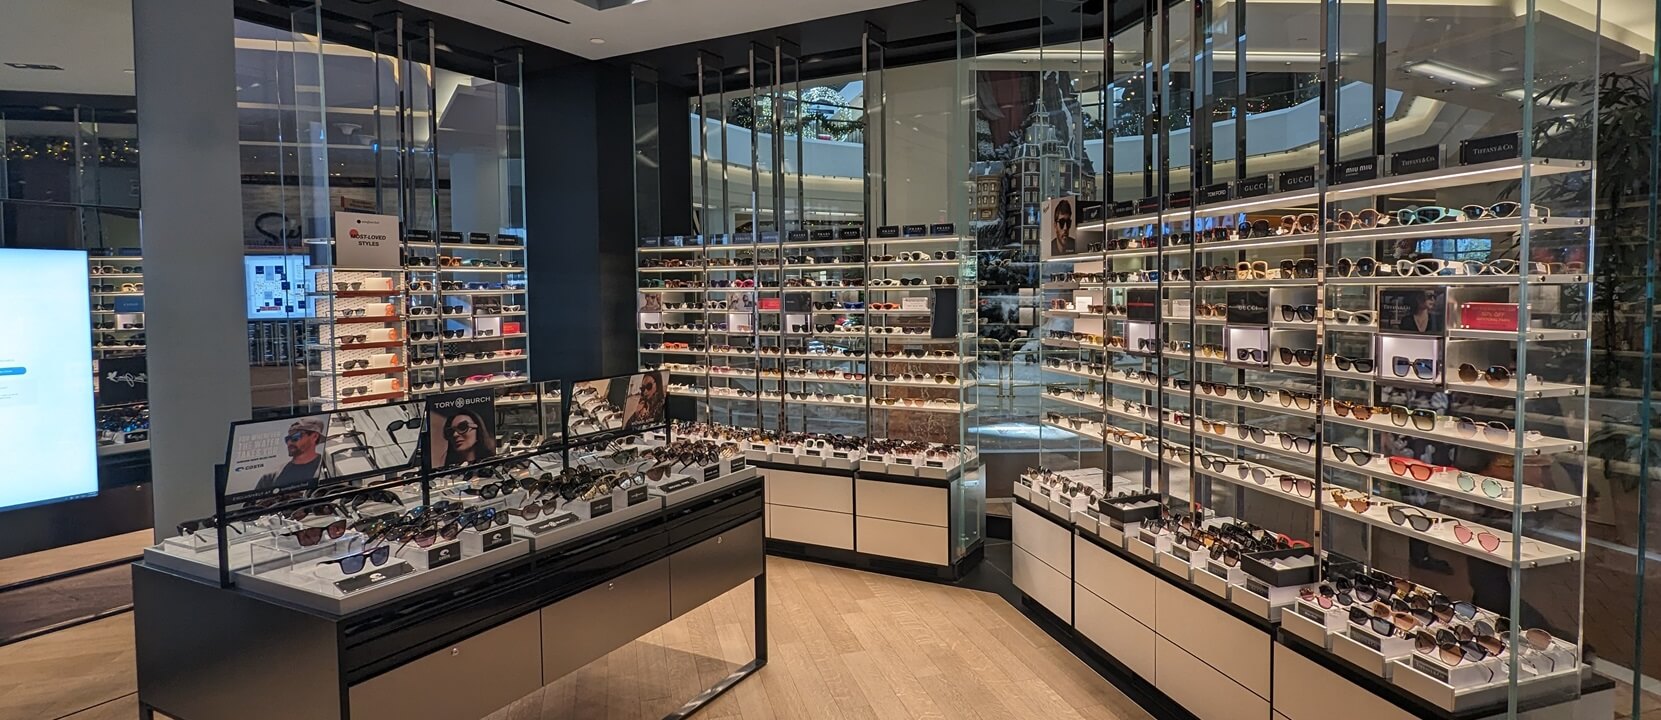 Nationwide Fixture Installations Inc NFI Sunglass Hut Case Study Retail Rollouts Millwork Packages New Store Installation Program Management Signage Site Surveys Custom Installation Services